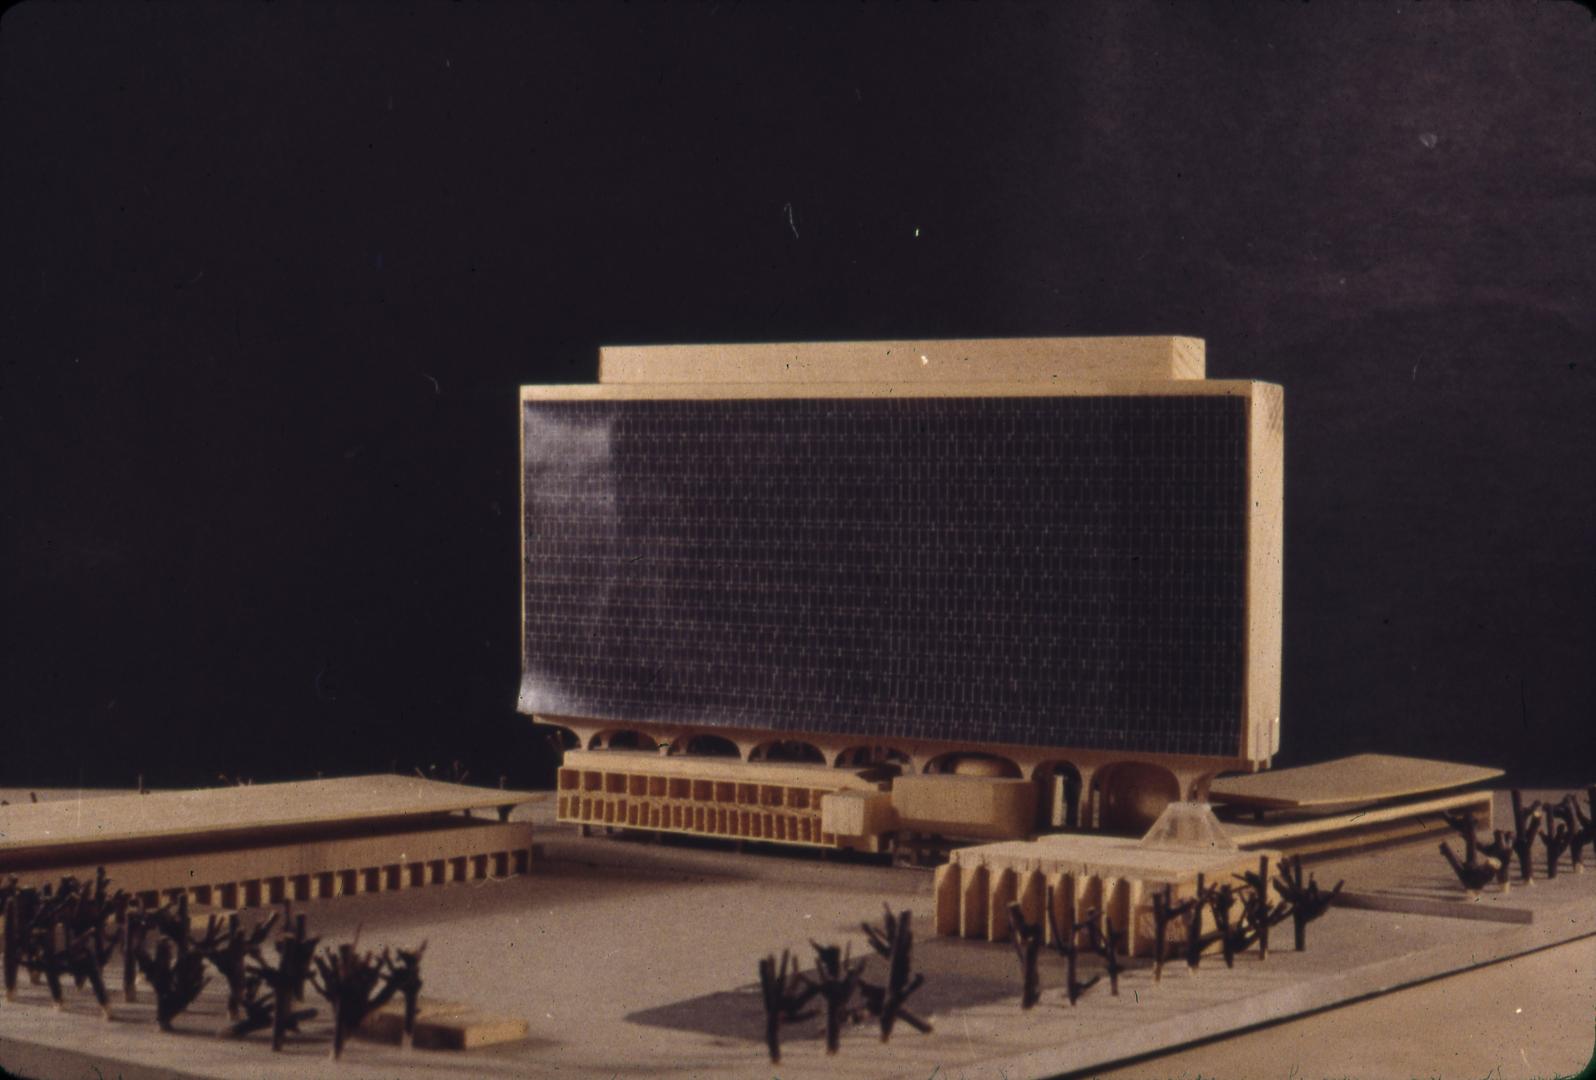 Massey, Elken, McBain entry, City Hall and Square Competition, Toronto, 1958, architectural model